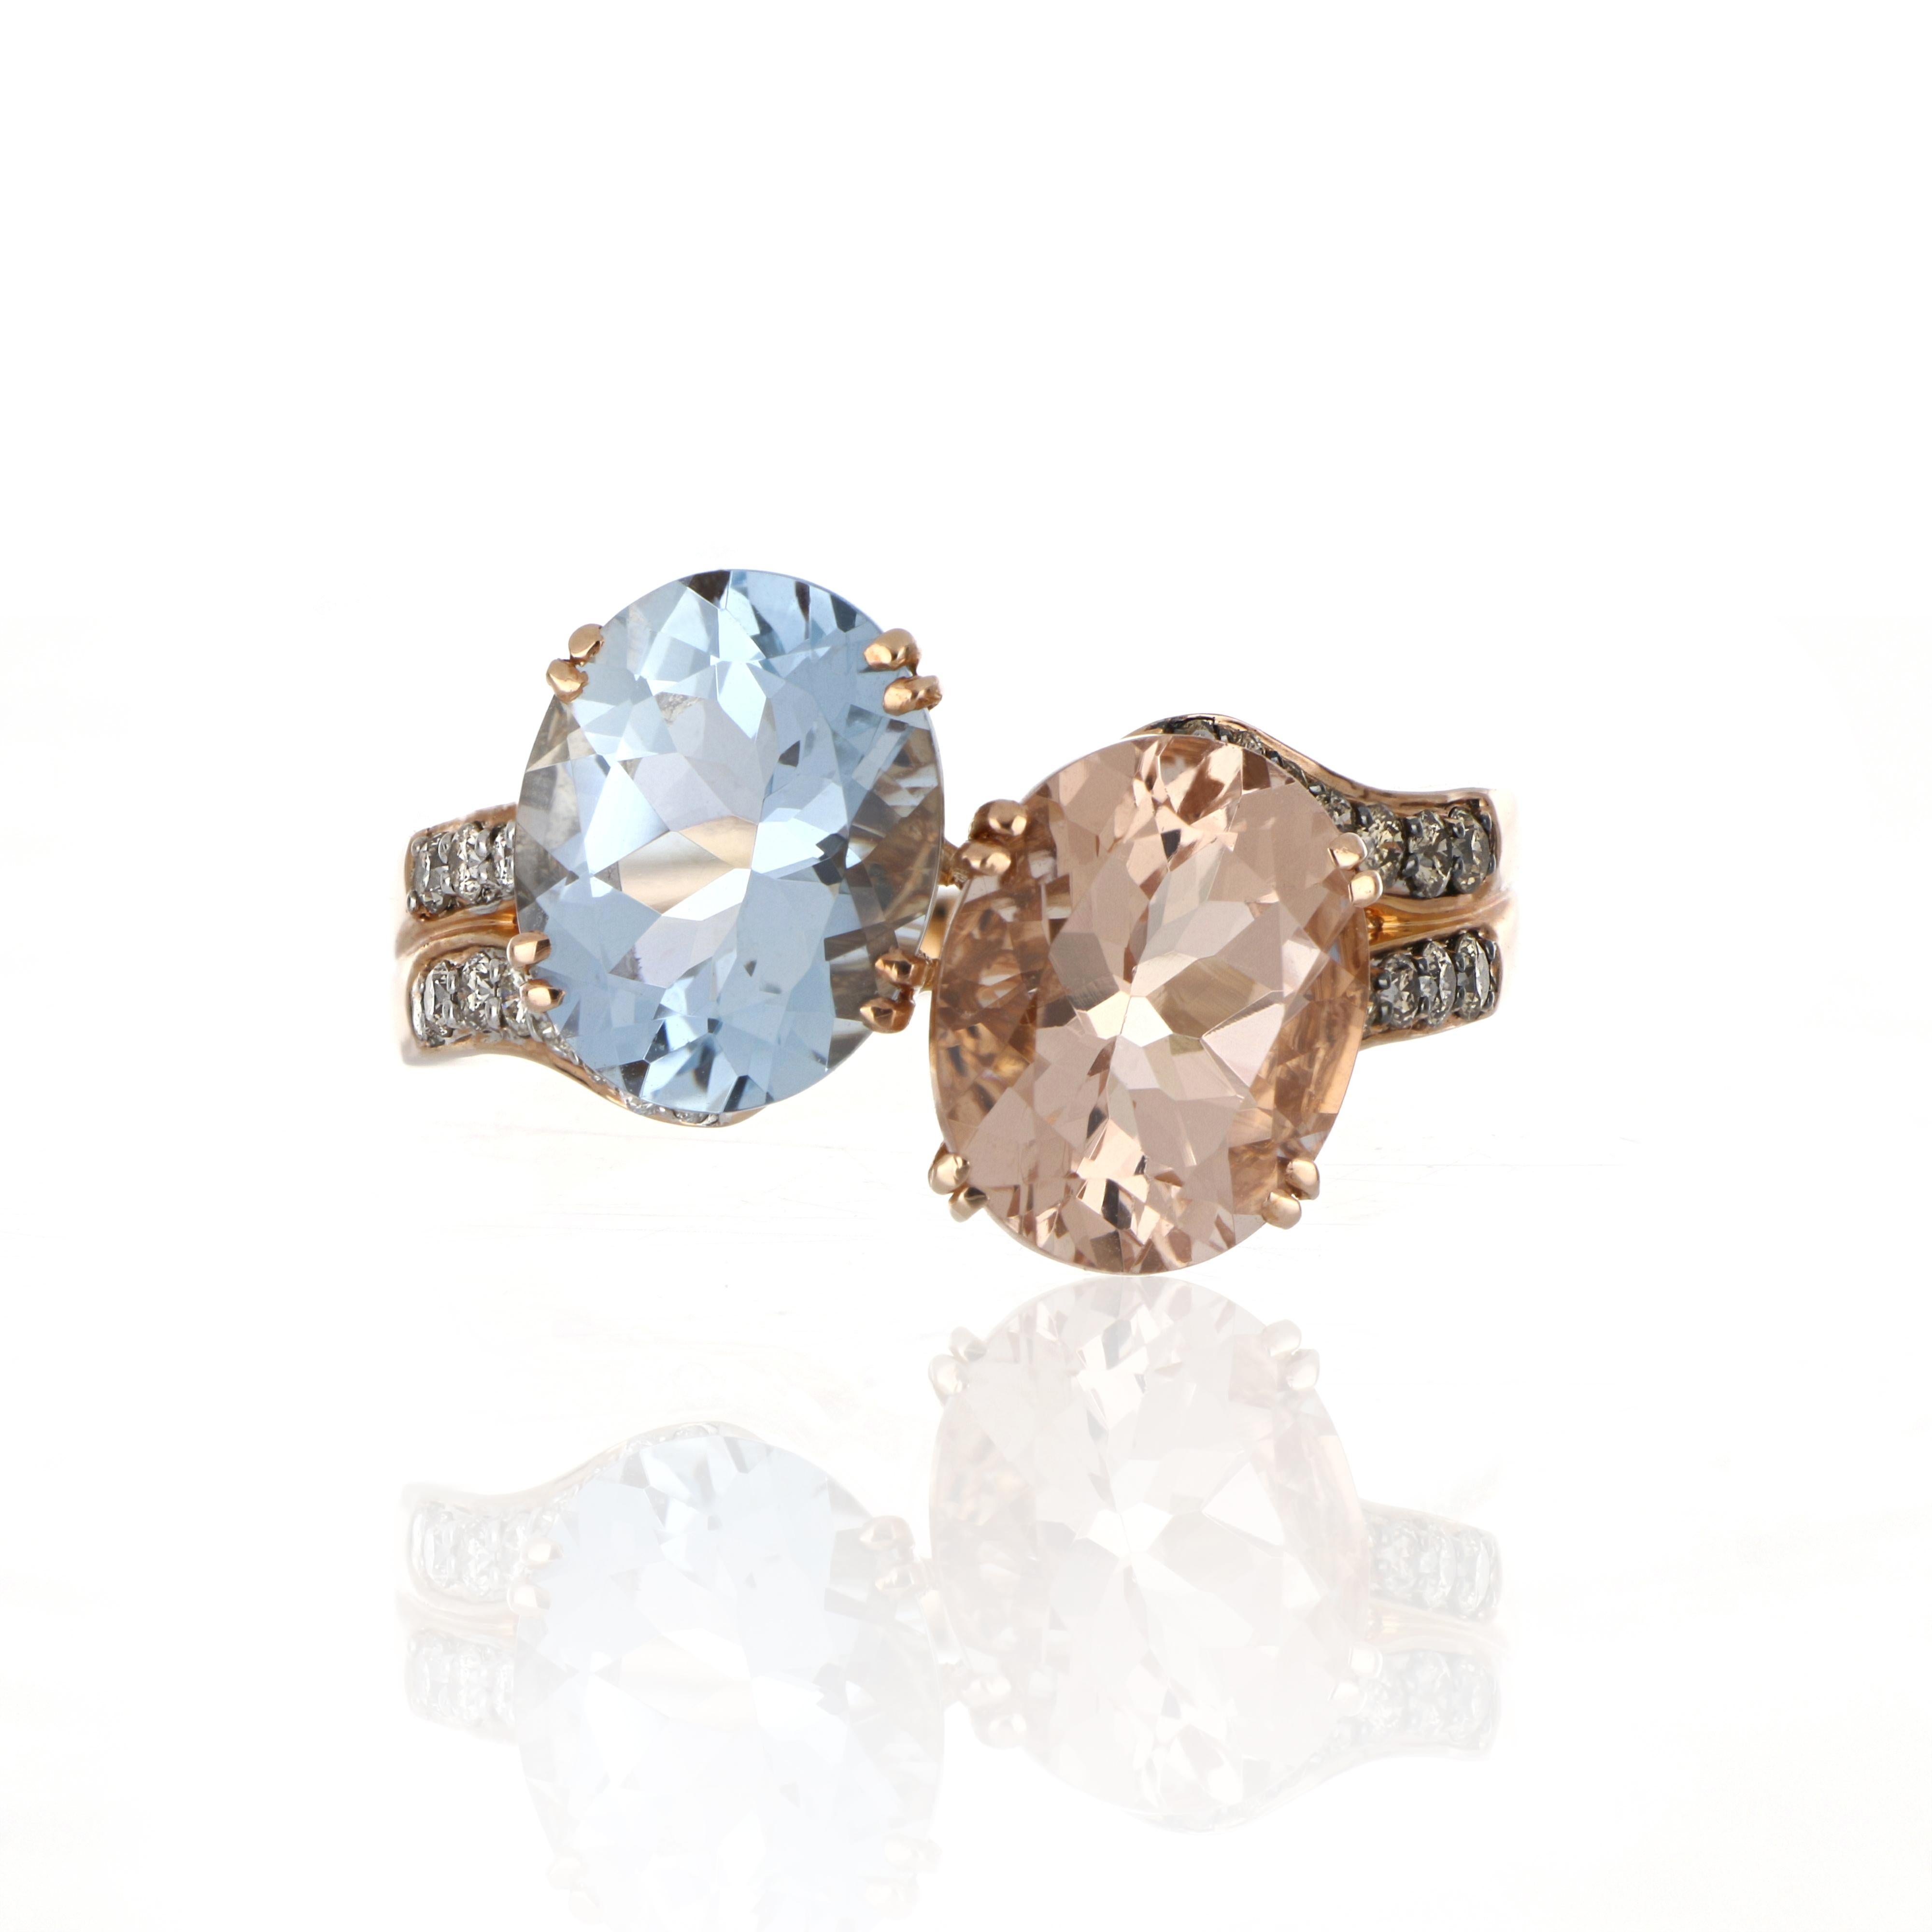 Elegant and exquisitely detailed Cocktail 14K Ring, centre set with 1.89 Cts. Oval Morganite and 2.16 Cts. Oval Aquamarine. Surrounded and enhanced on shank with white and Chocolate Diamonds, weighing approx. 0.20 ct. Beautifully Hand crafted in 14